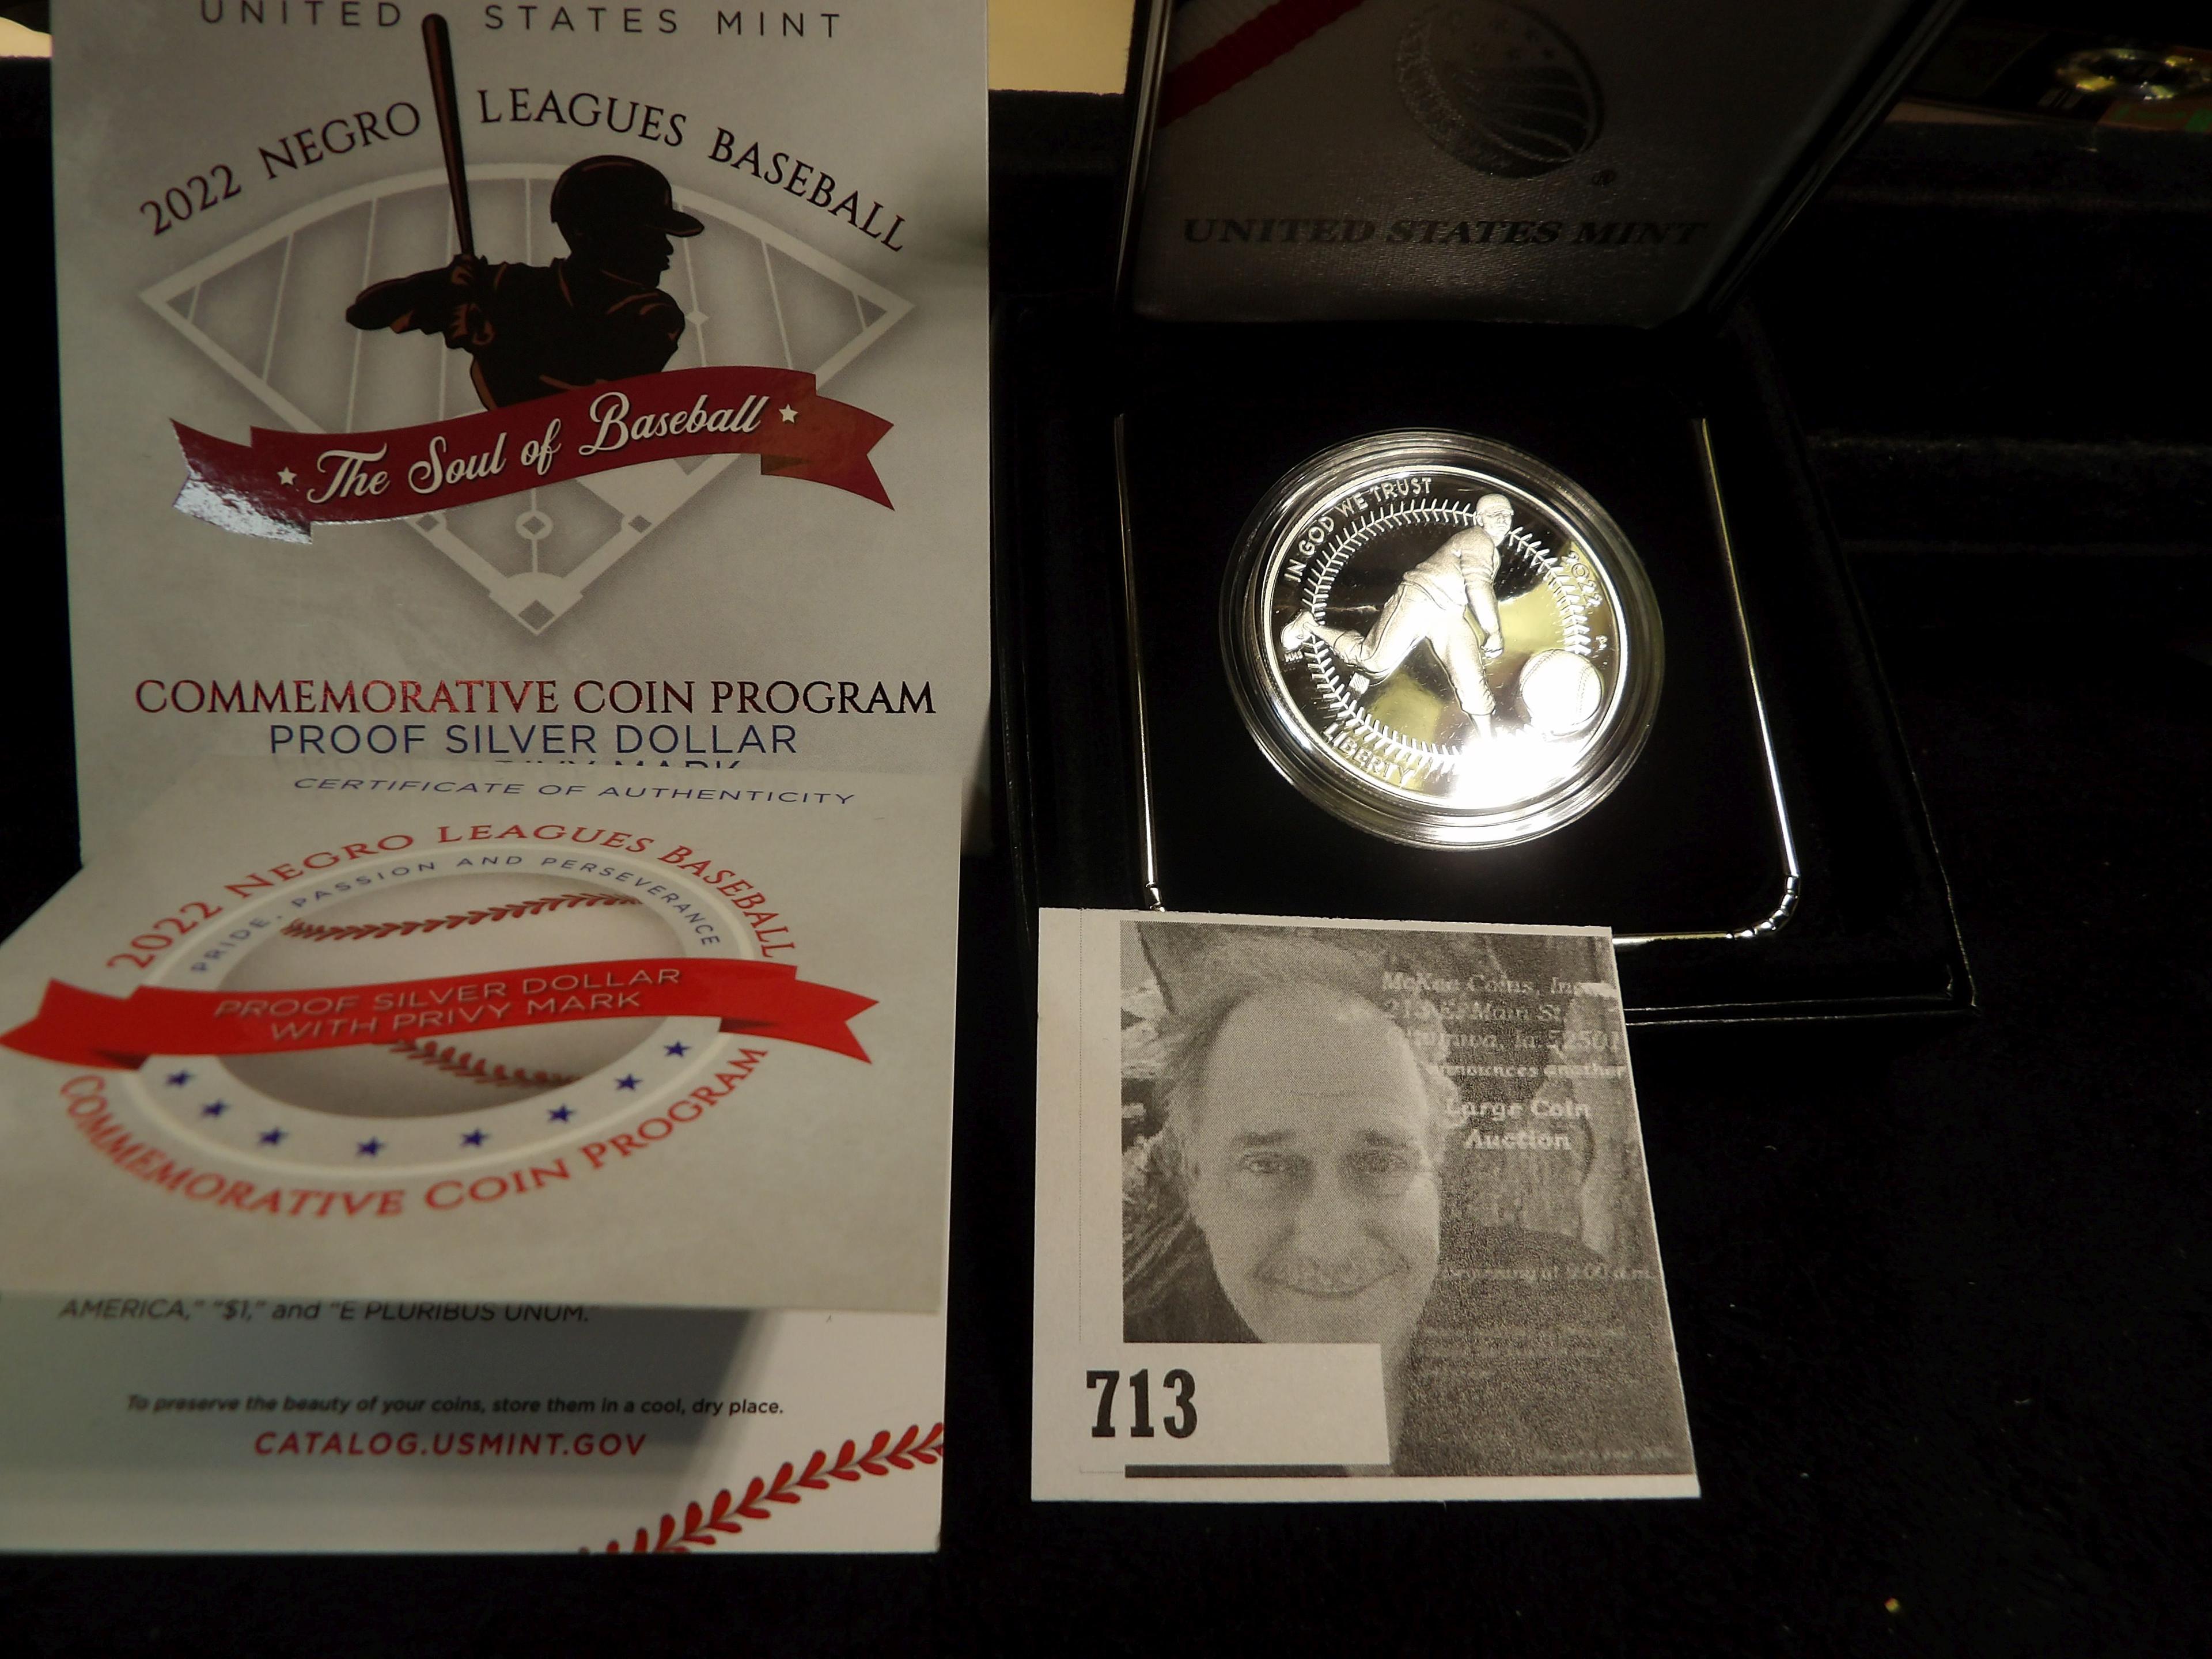 2022 P U.S. Mint Negro Leagues Baseball *The Soul of Baseball* Proof Silver Dollar with Privy Mark.